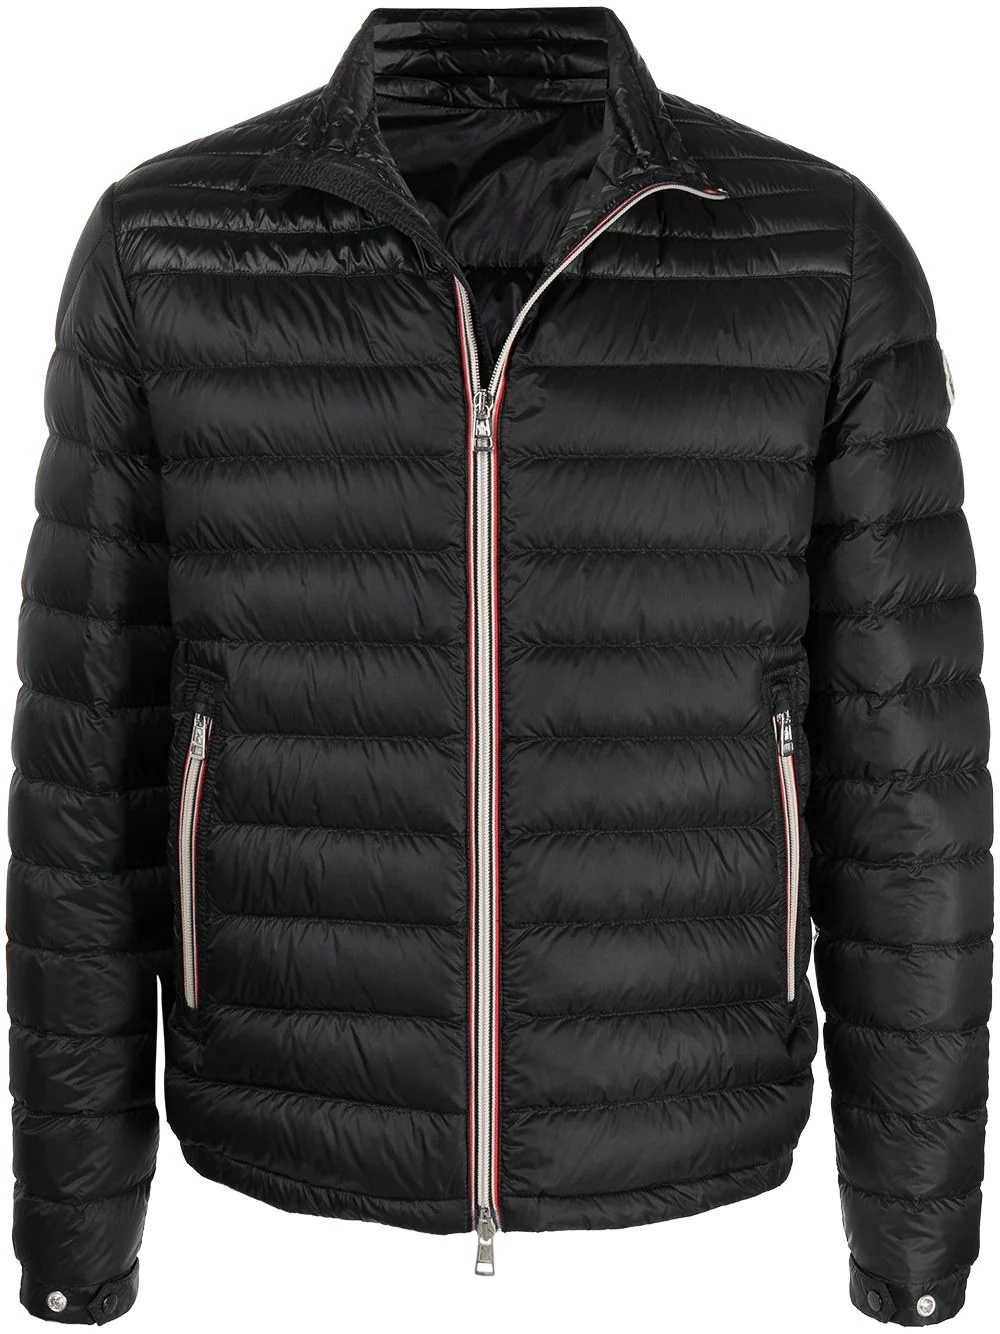 Daniel quilted jacket - 1